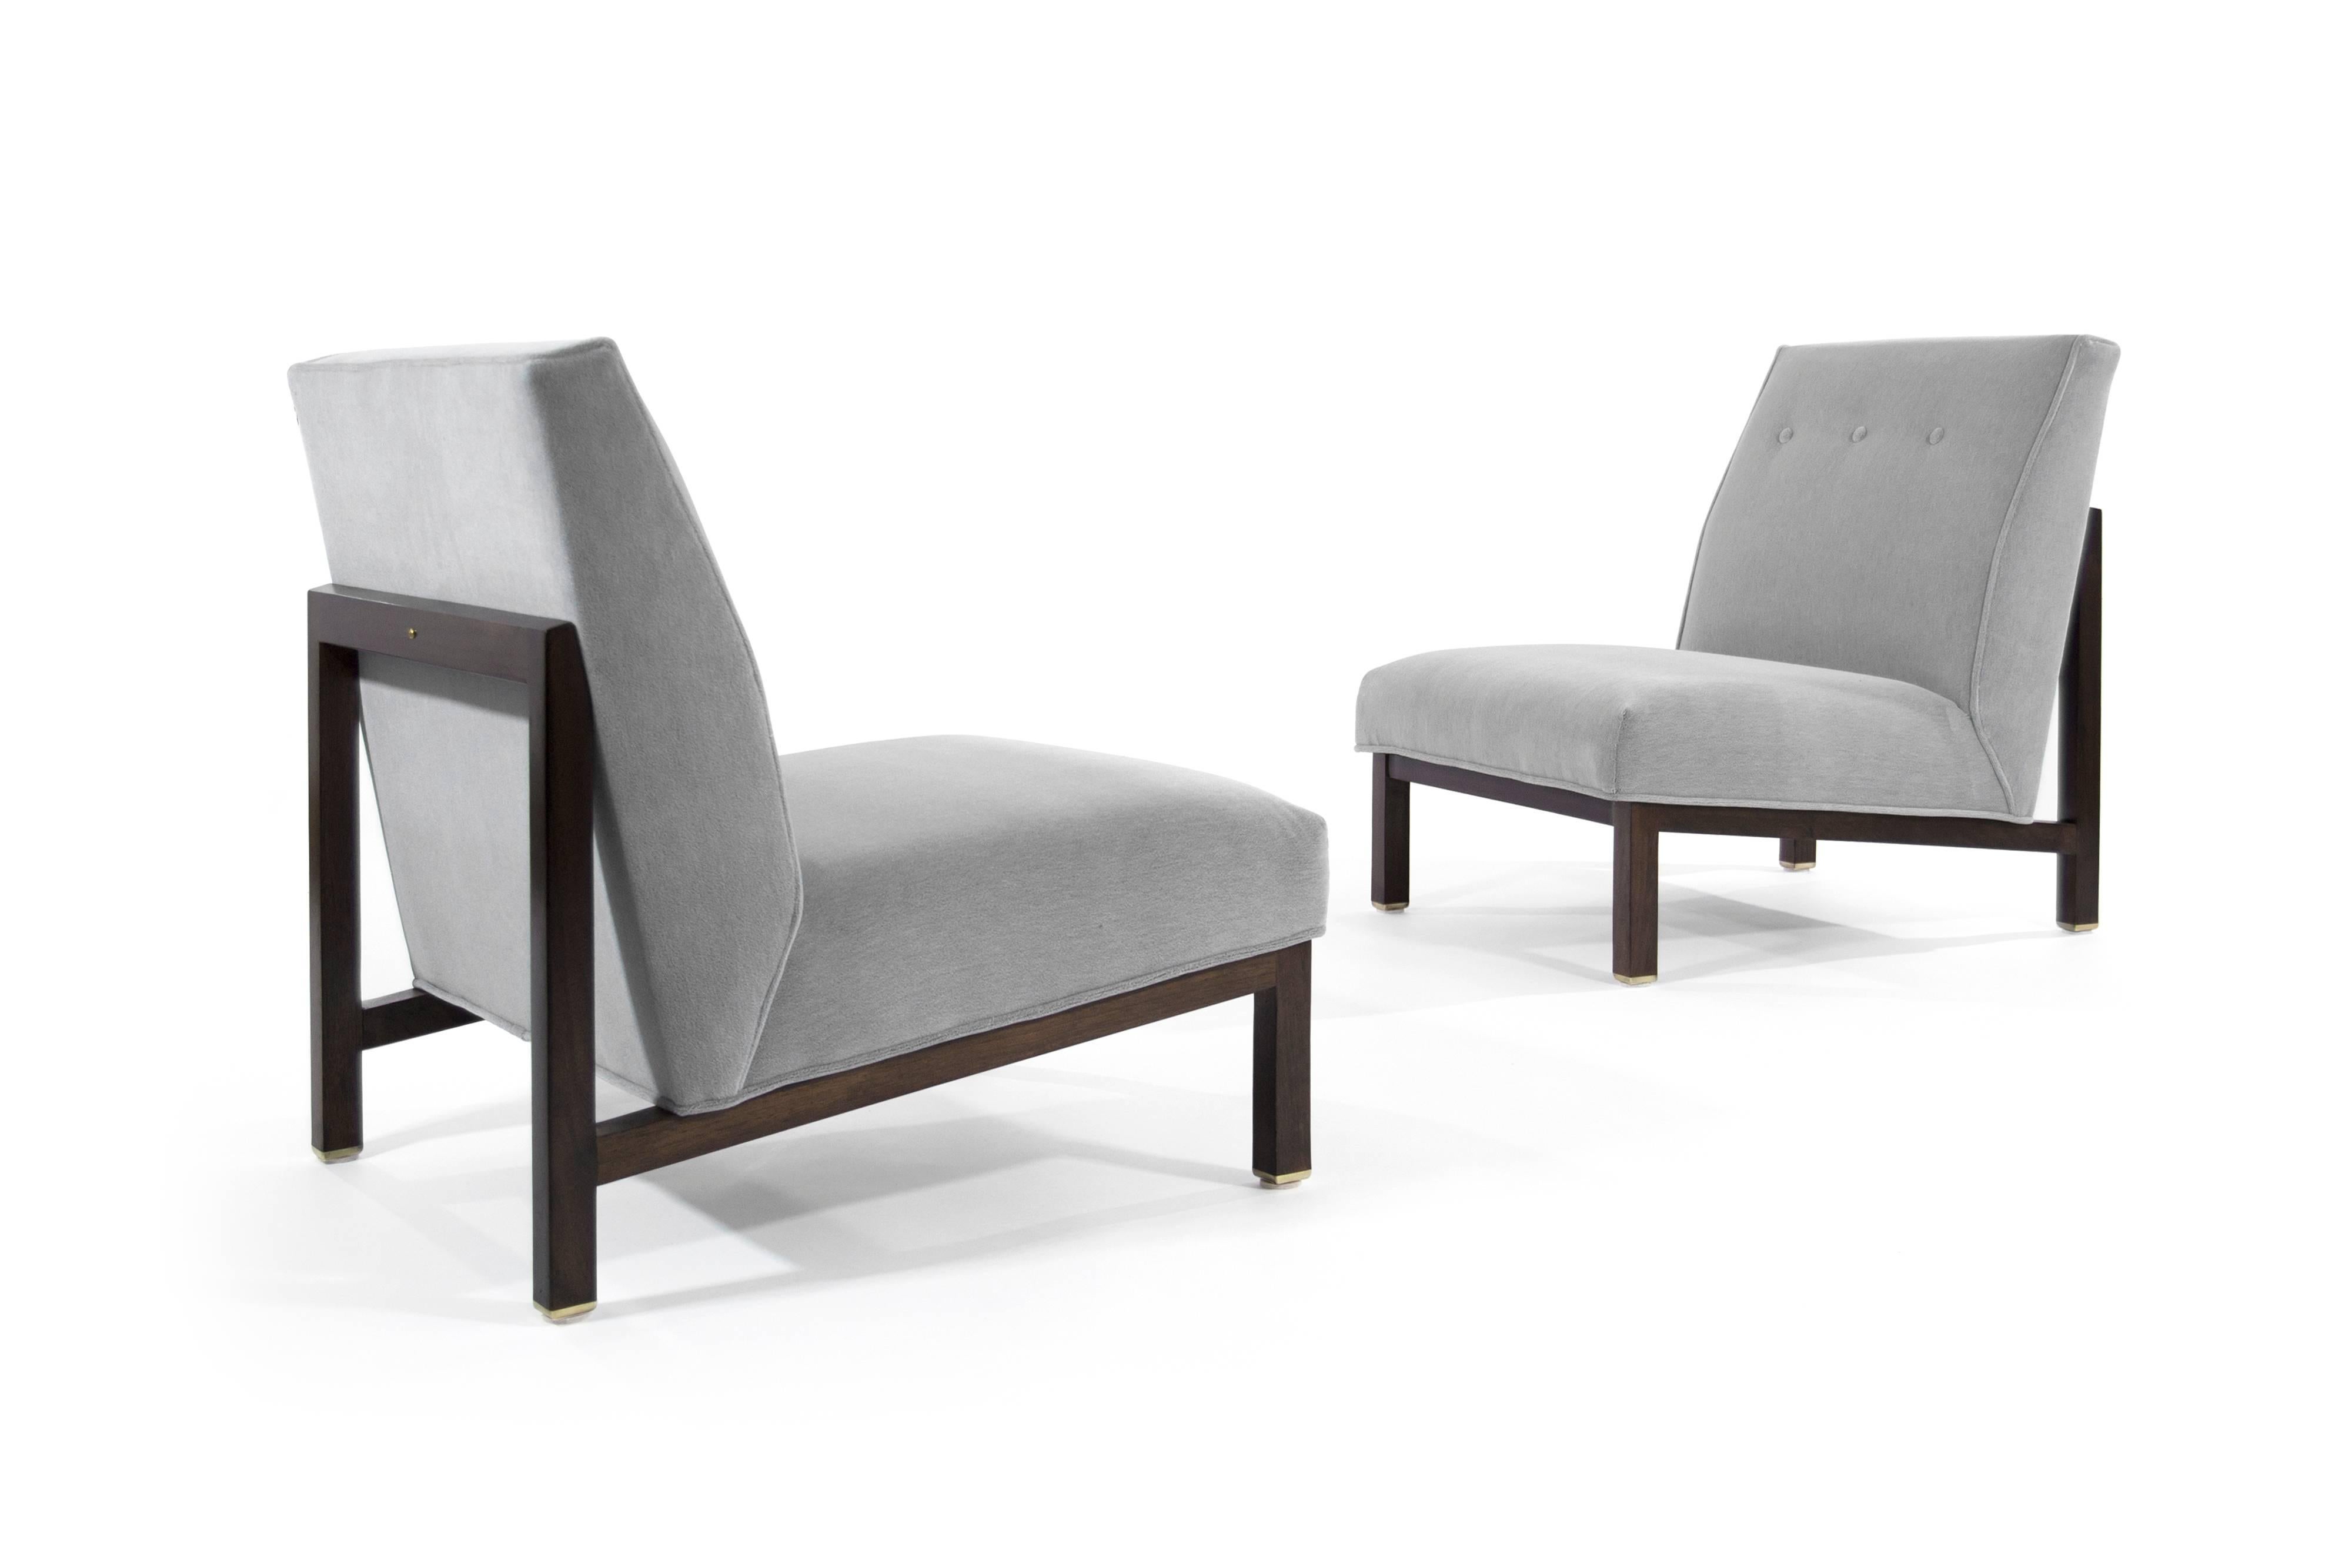 Pair of slipper chairs designed by Edward Wormley for Dunbar.
Walnut frames fully restored, brass feet hand polished, newly upholstered in grey mohair.